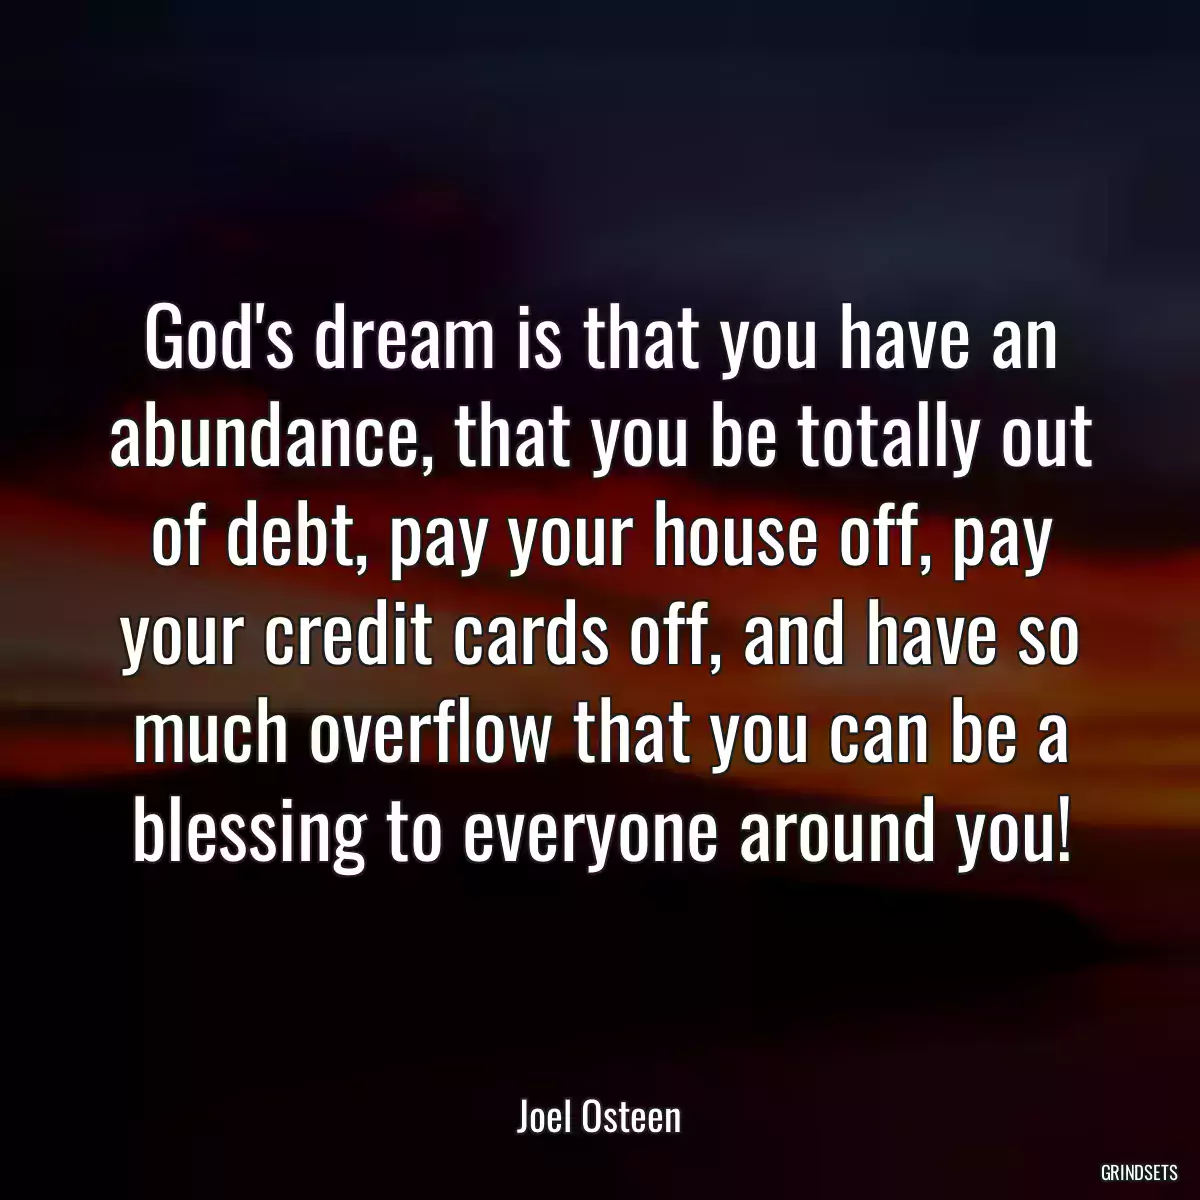 God\'s dream is that you have an abundance, that you be totally out of debt, pay your house off, pay your credit cards off, and have so much overflow that you can be a blessing to everyone around you!